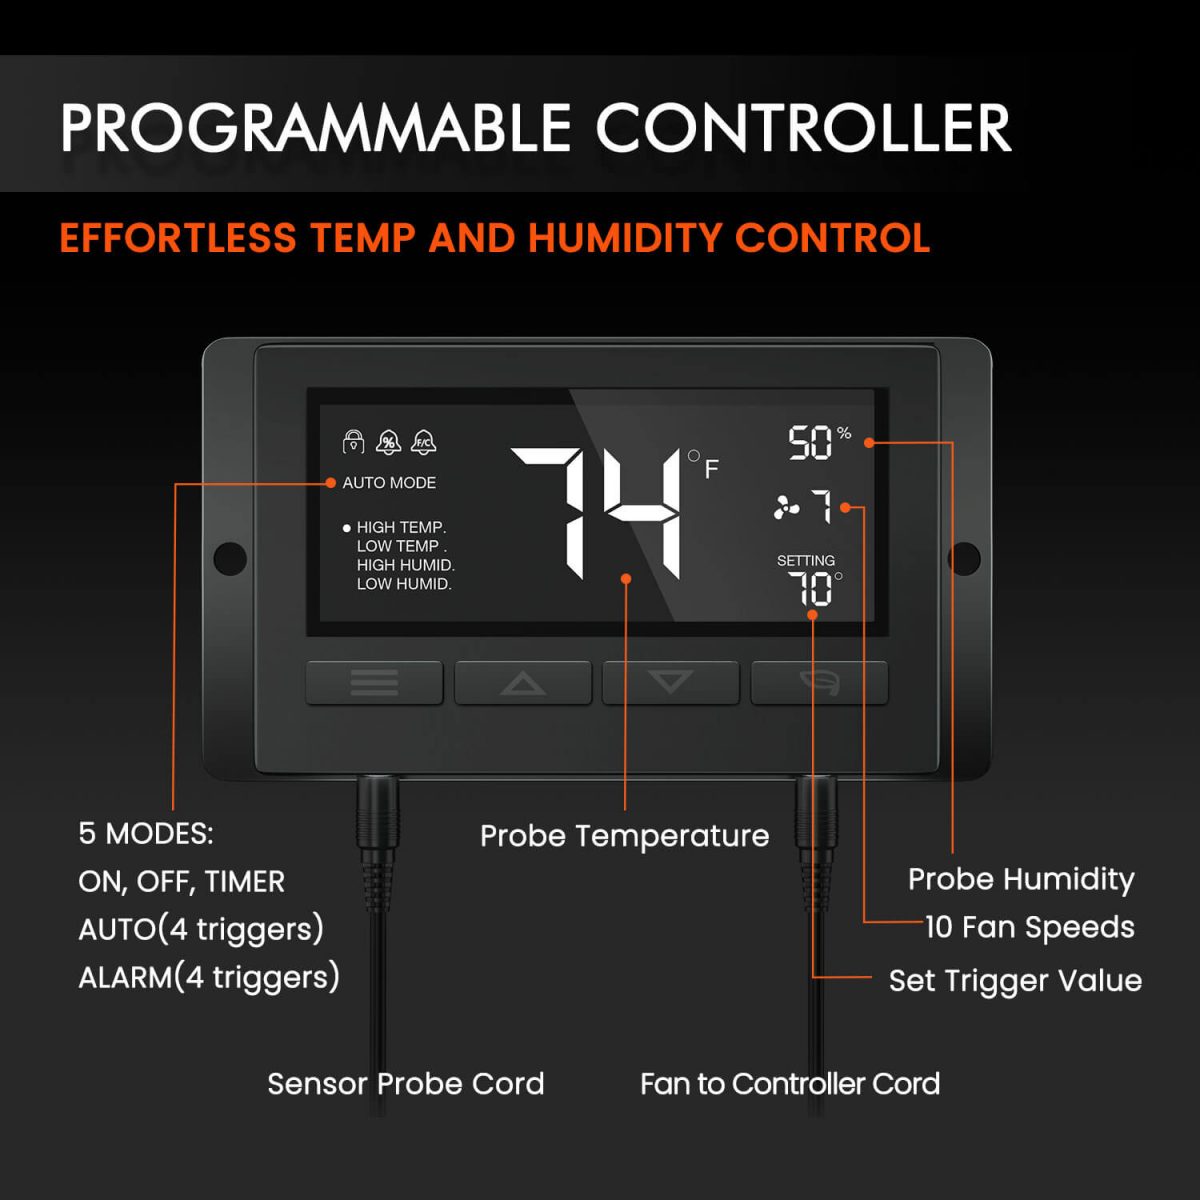 Programmable Controller